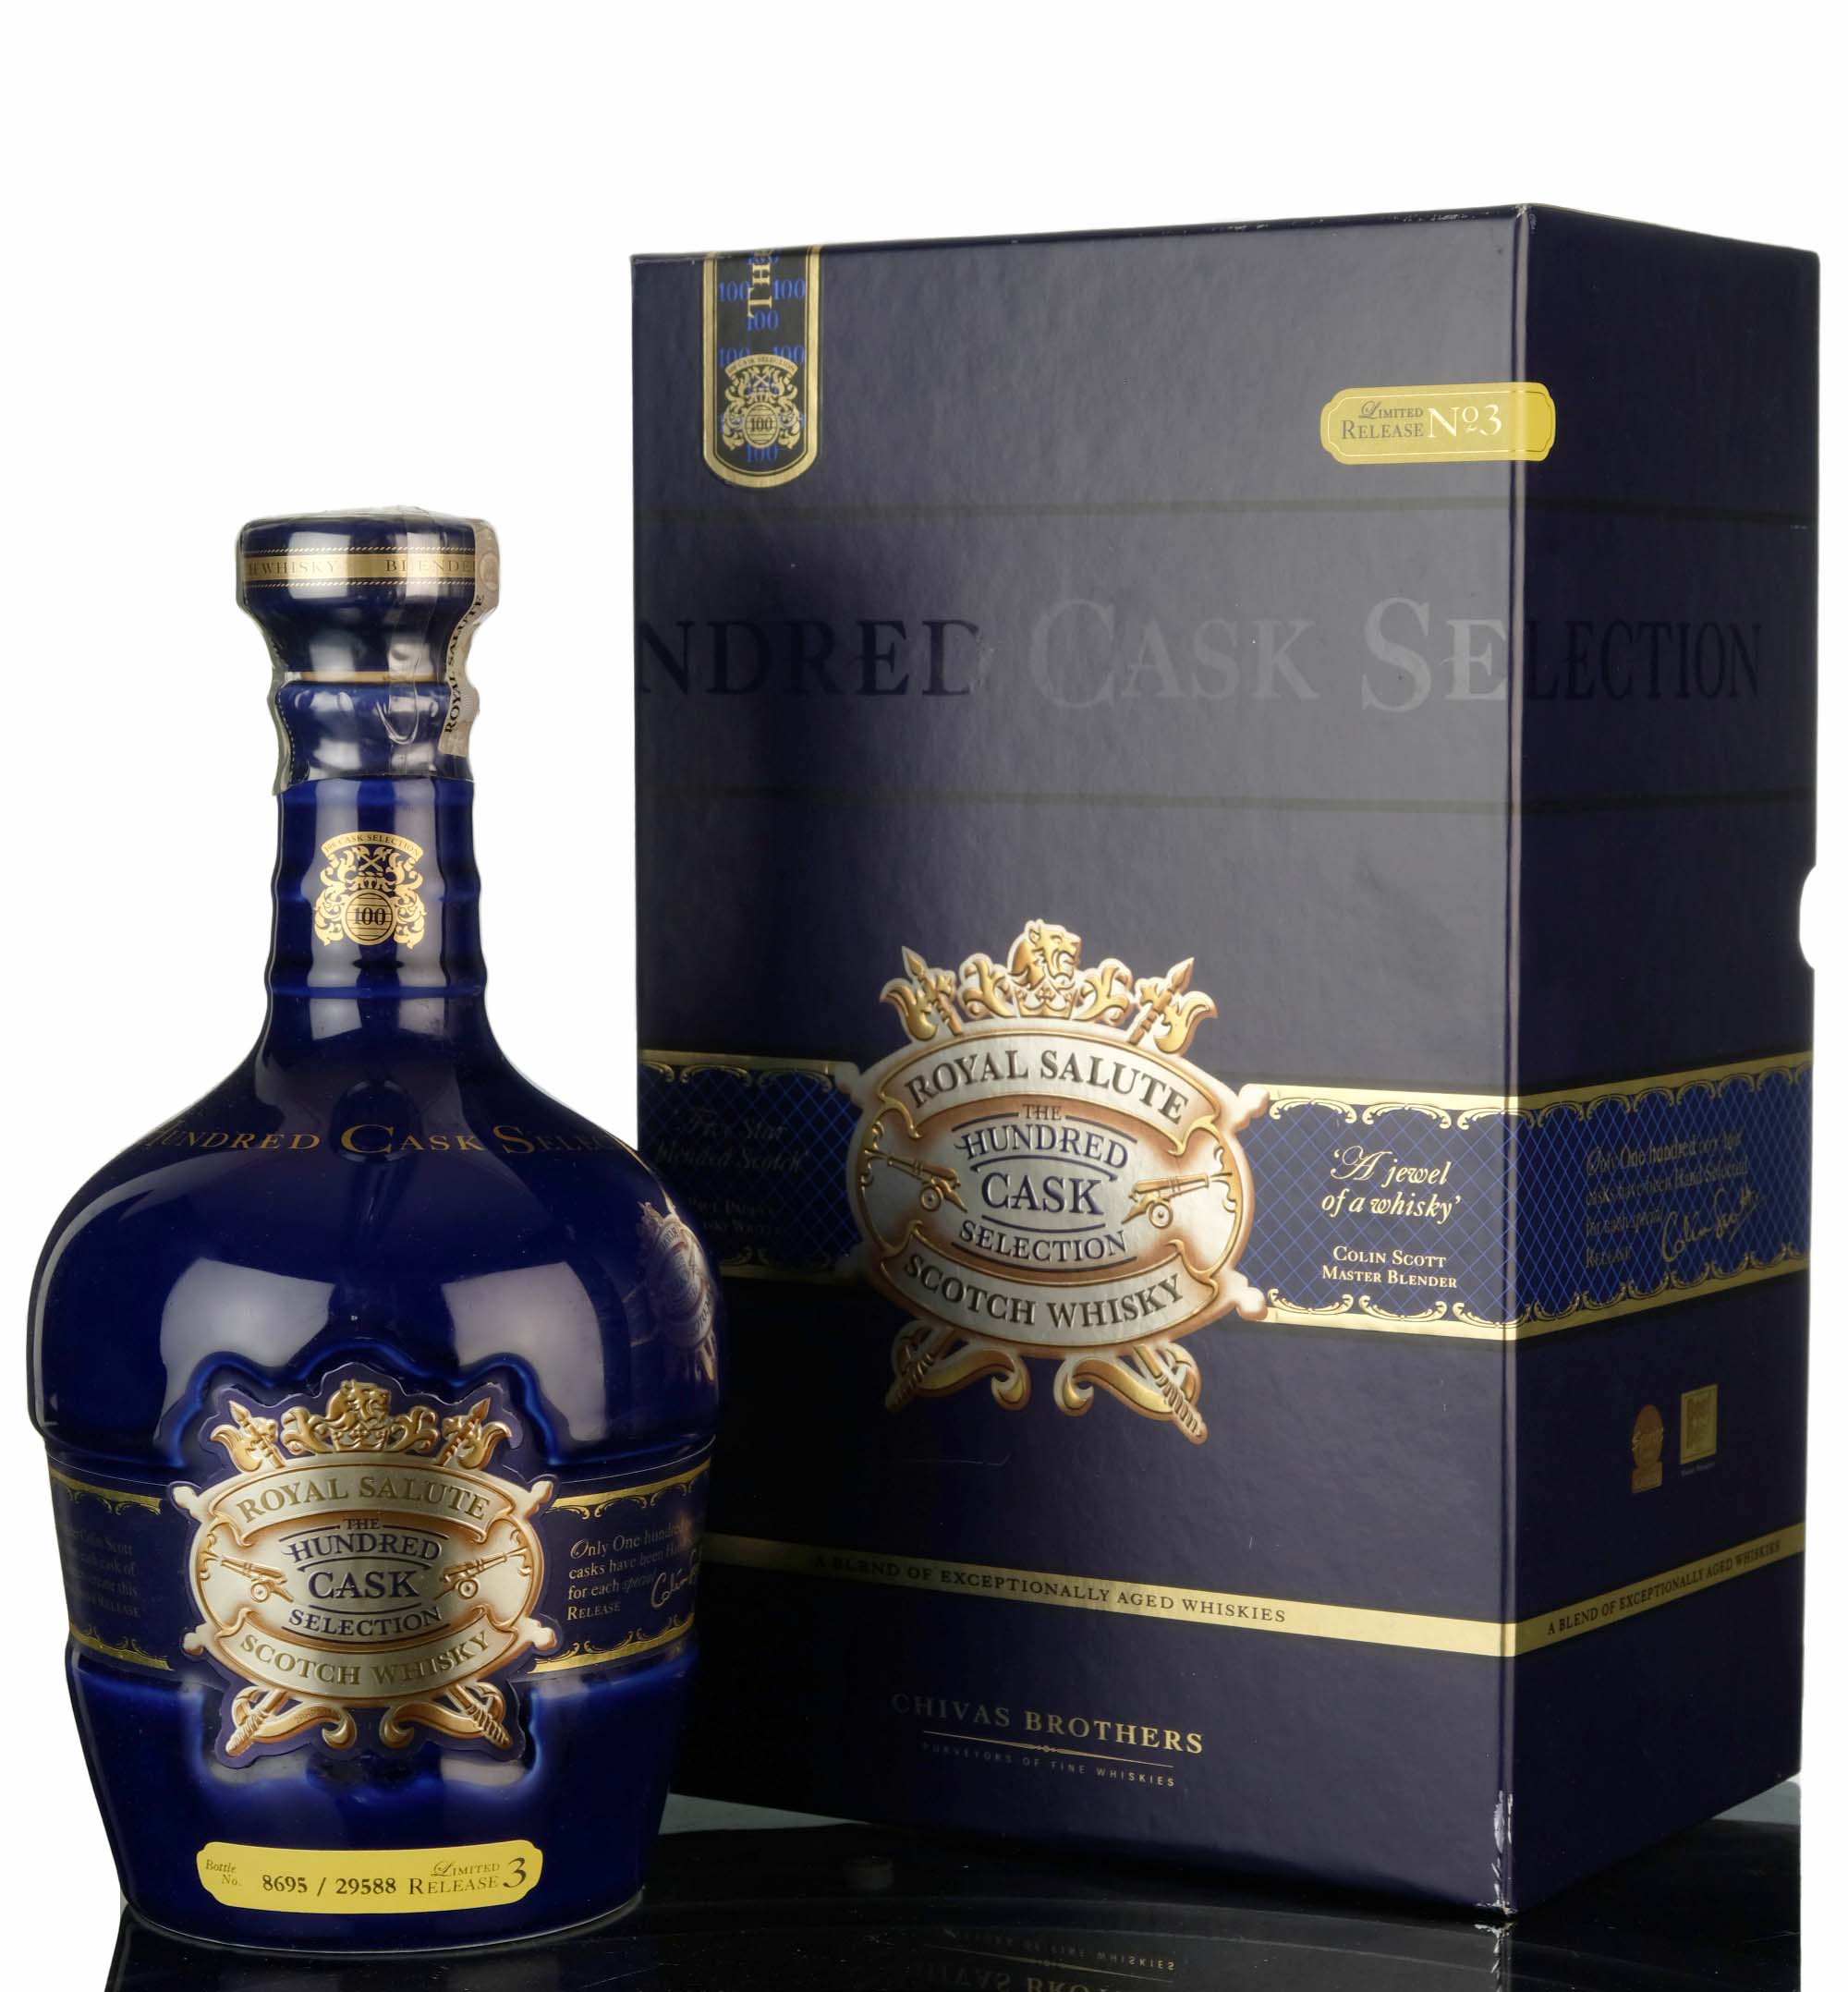 Royal Salute Hundred Cask Selection - Limited release No.3